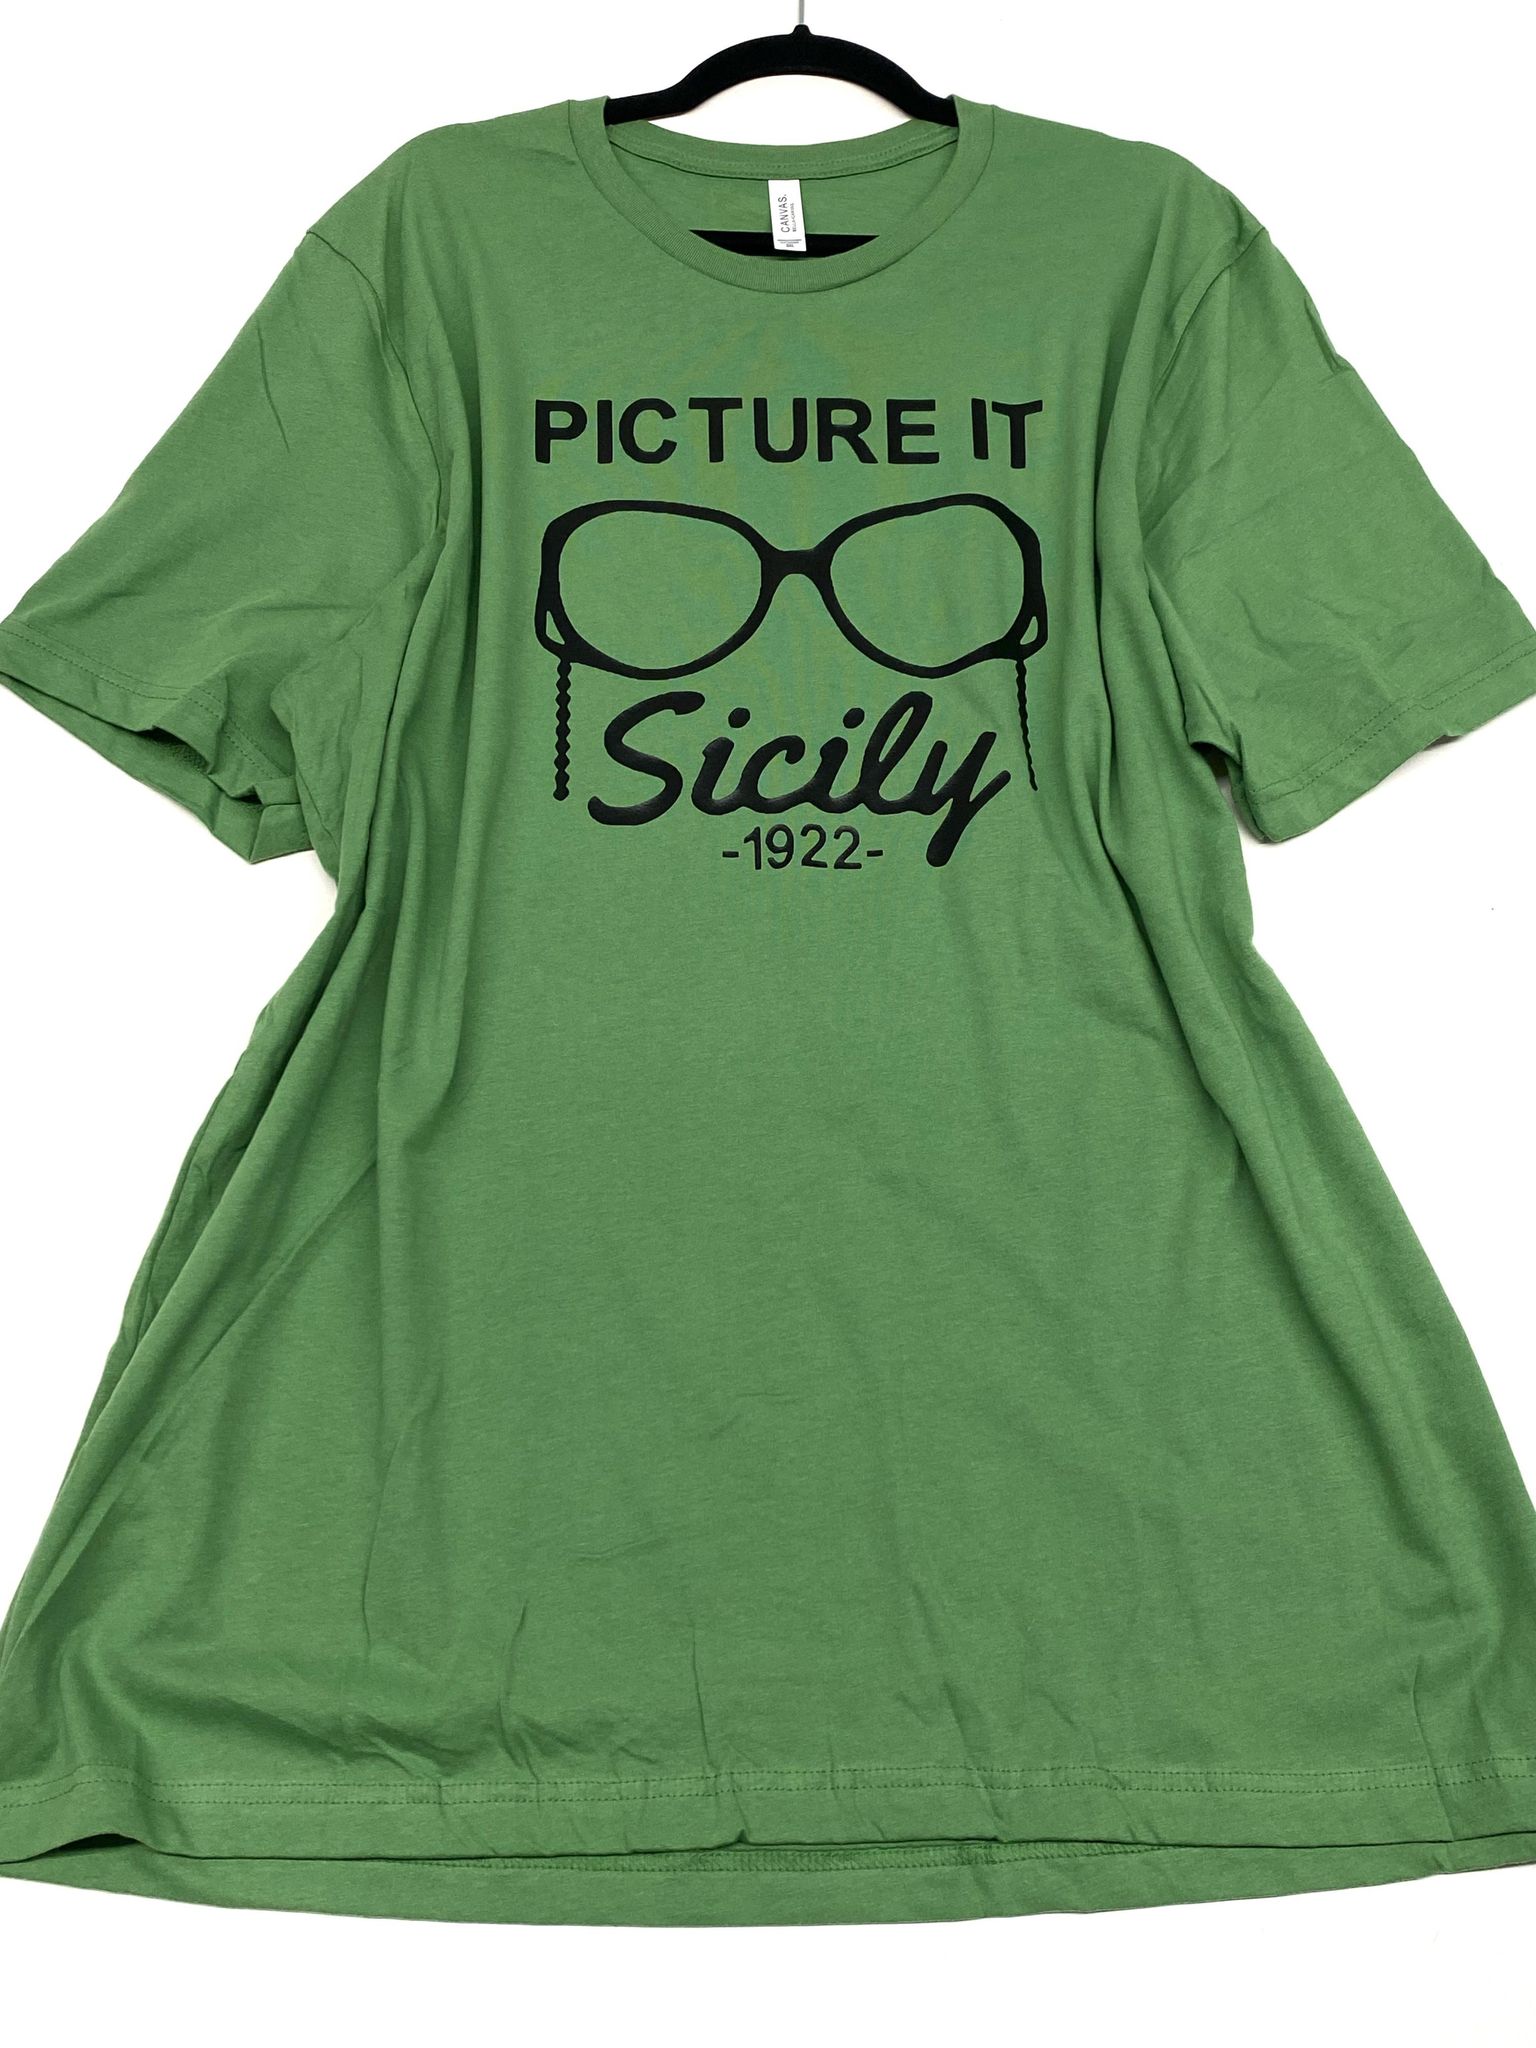 Picture it - Sicily 1922 Golden Girls Tee